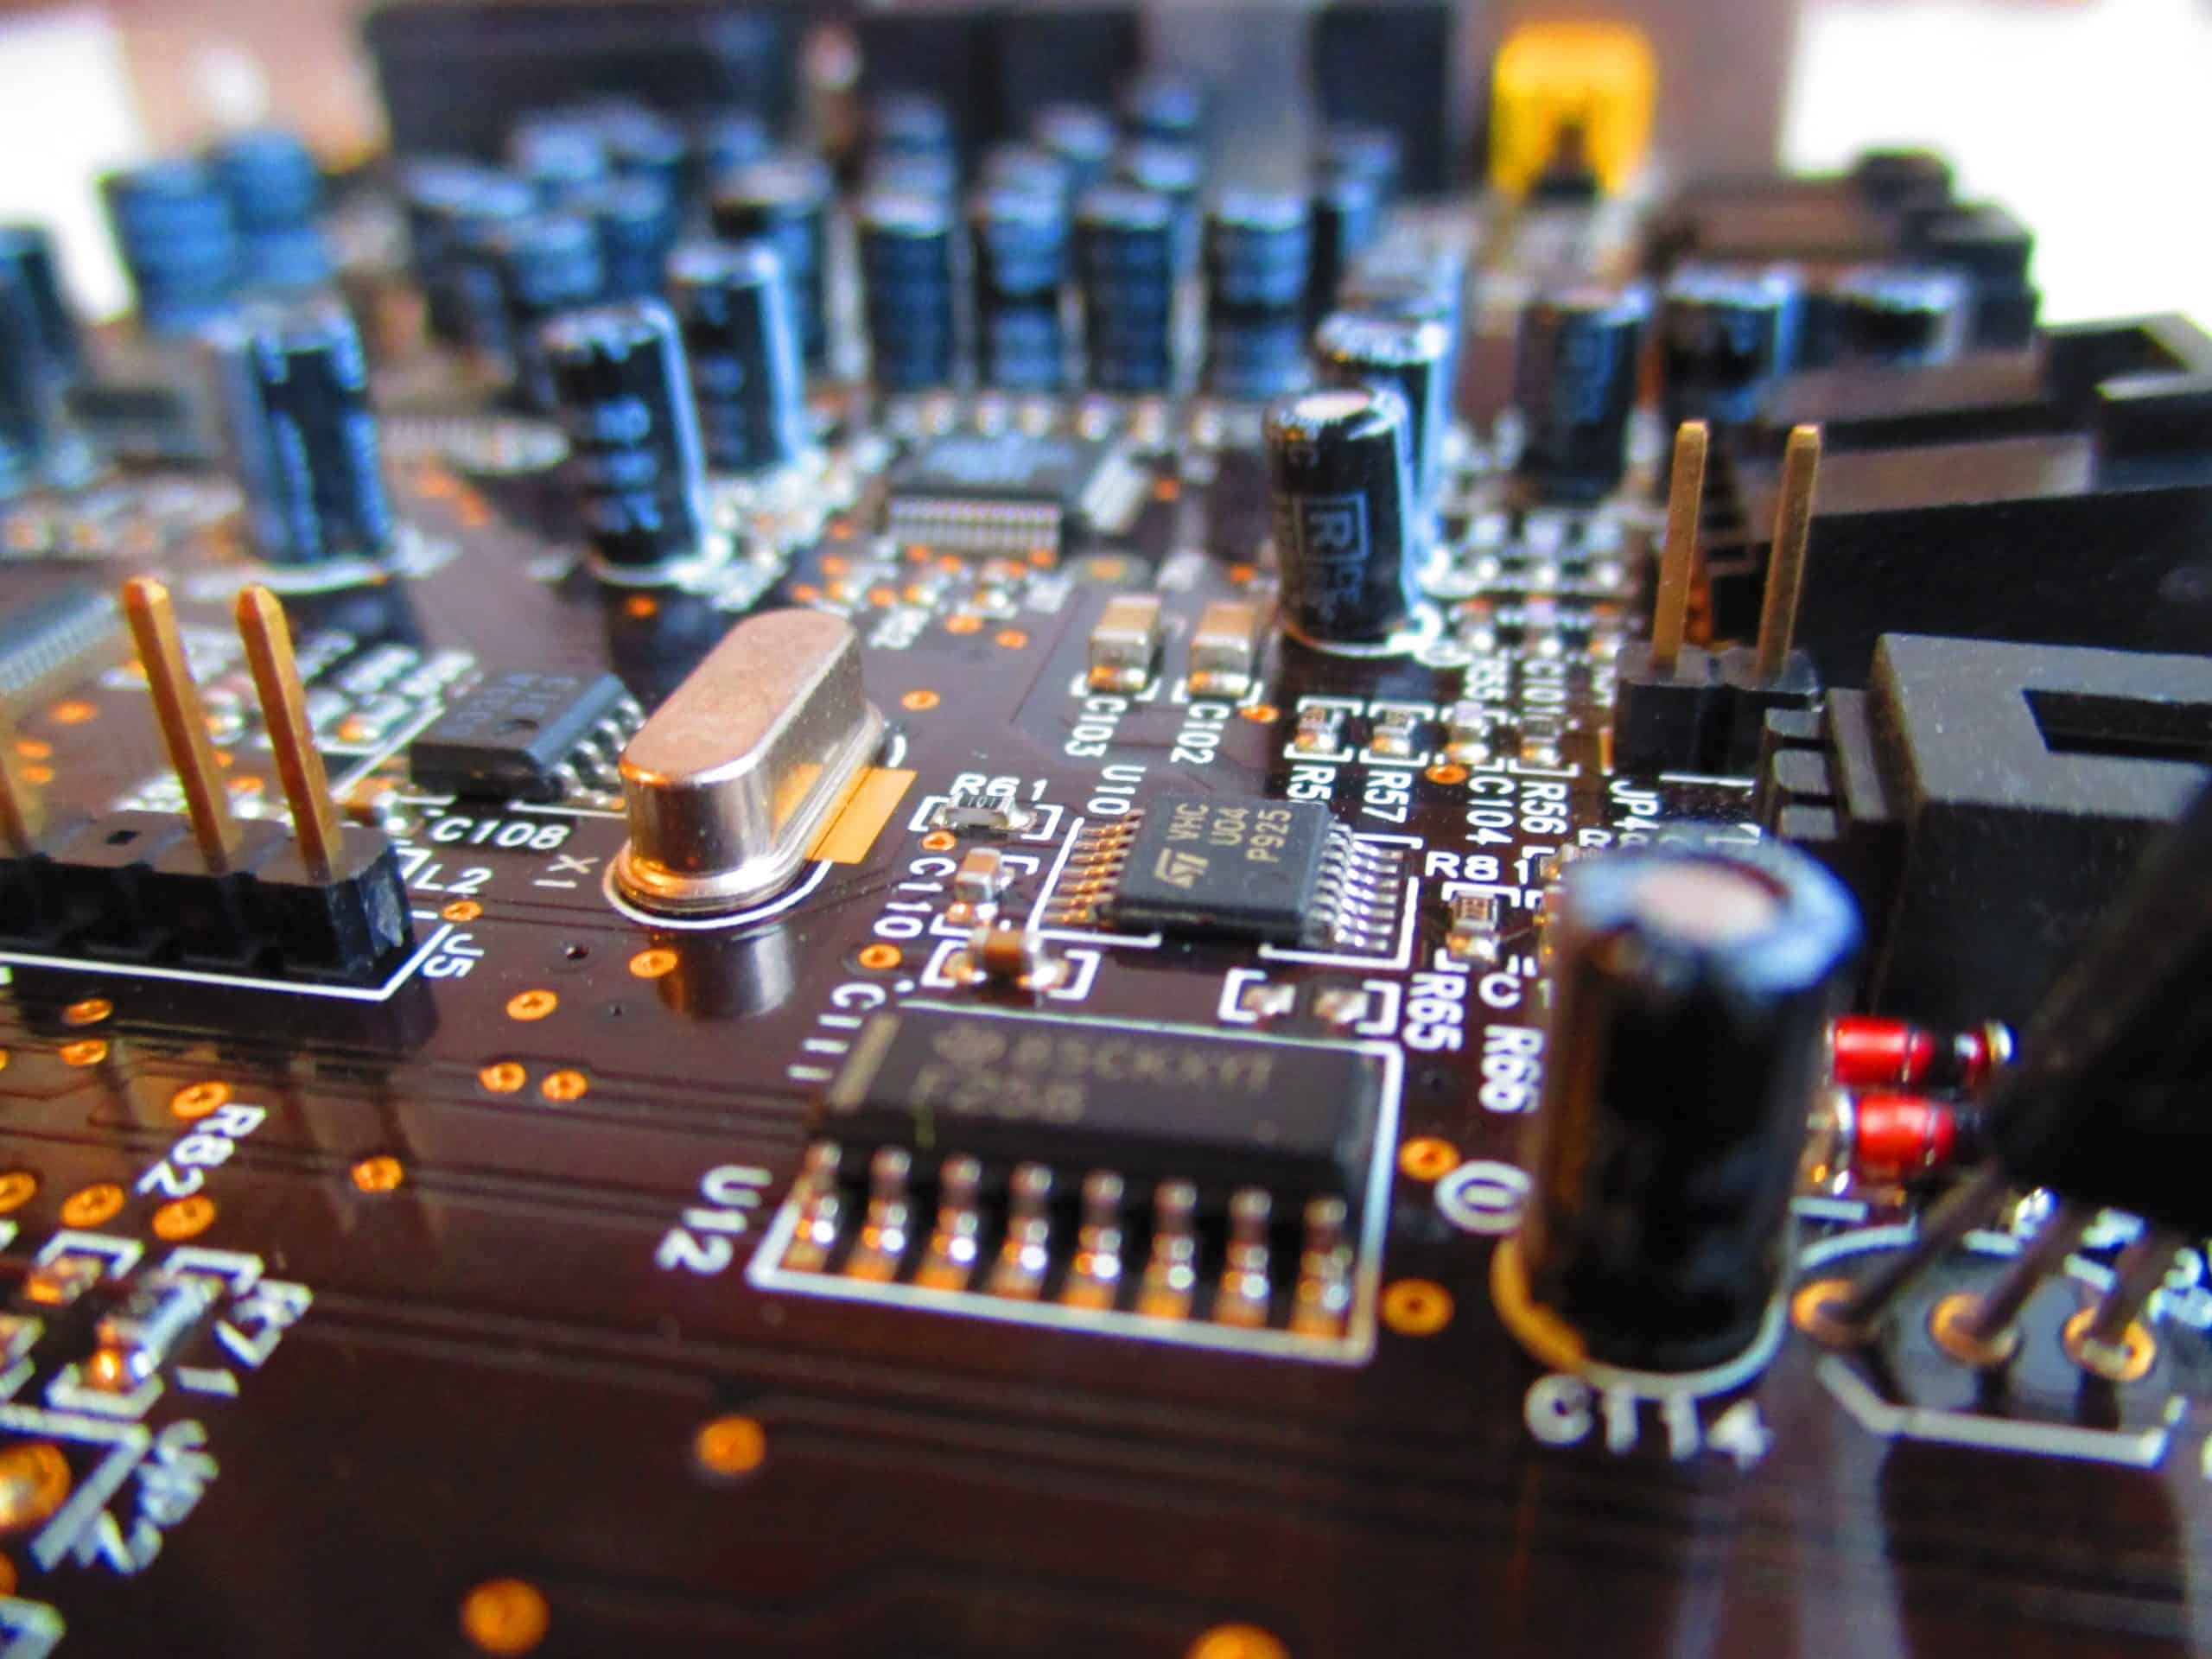 Zoomed-in view of a circuit board with various electronic components